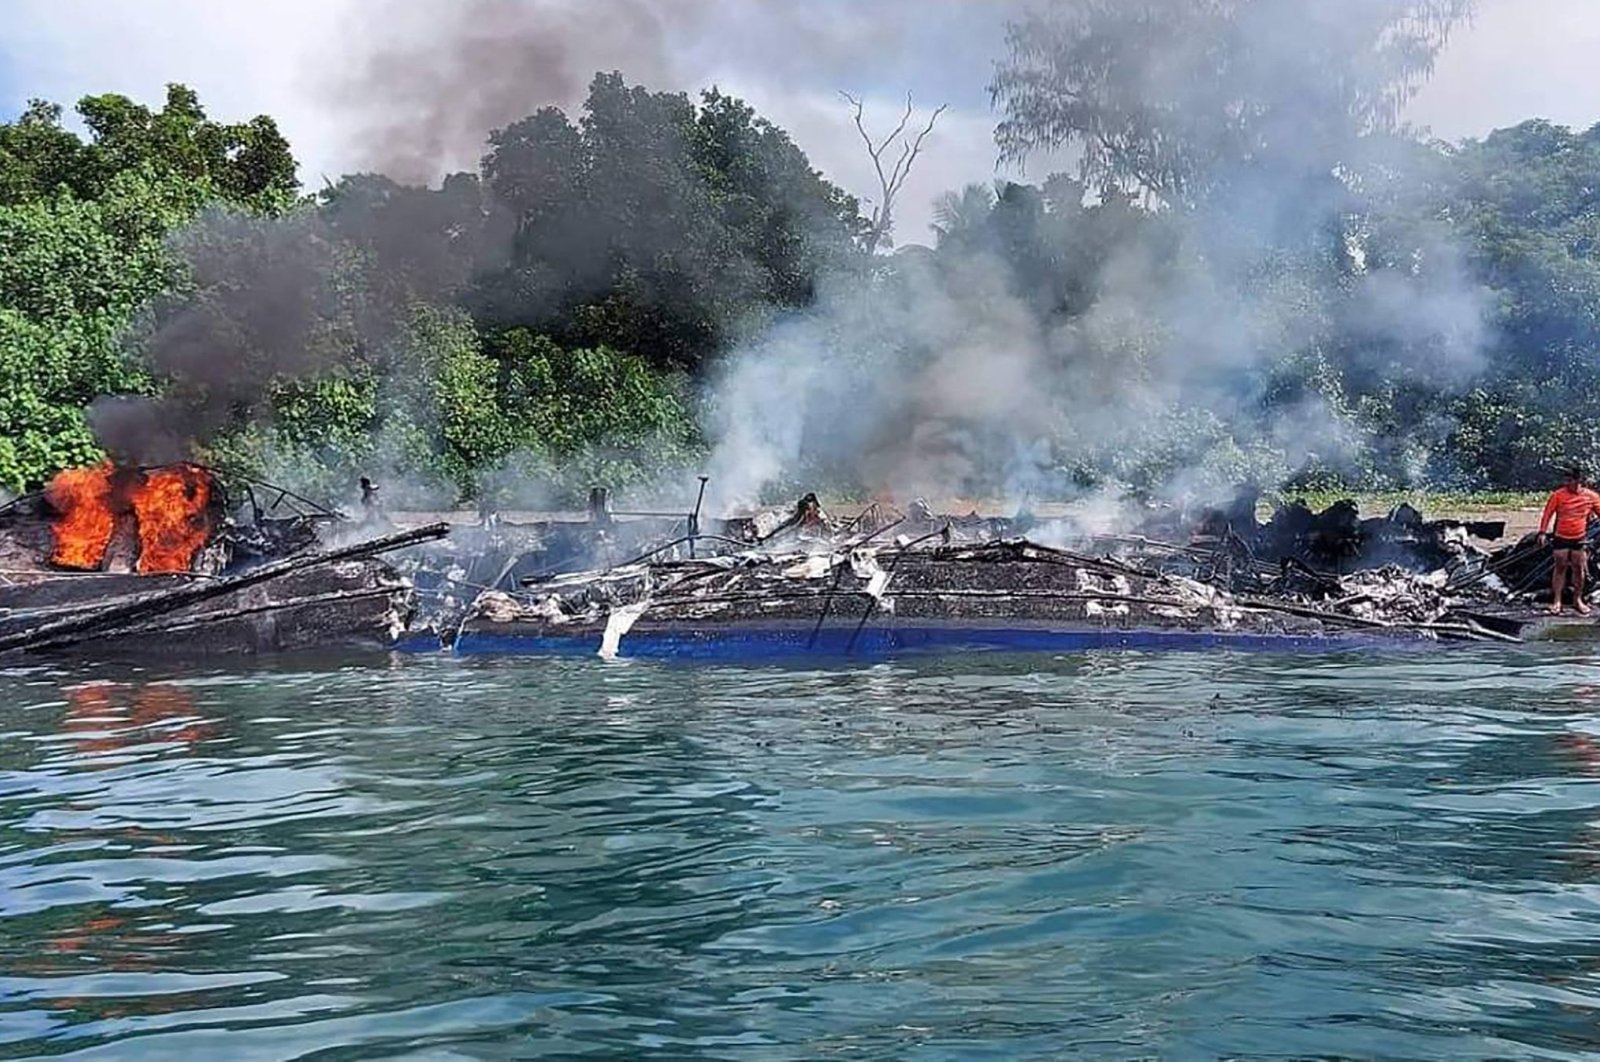 The remains of a passenger ferry after fire near the town of Real, Quezon province, Philippines, May 23, 2022. (Philippine Coast Guard via AFP)